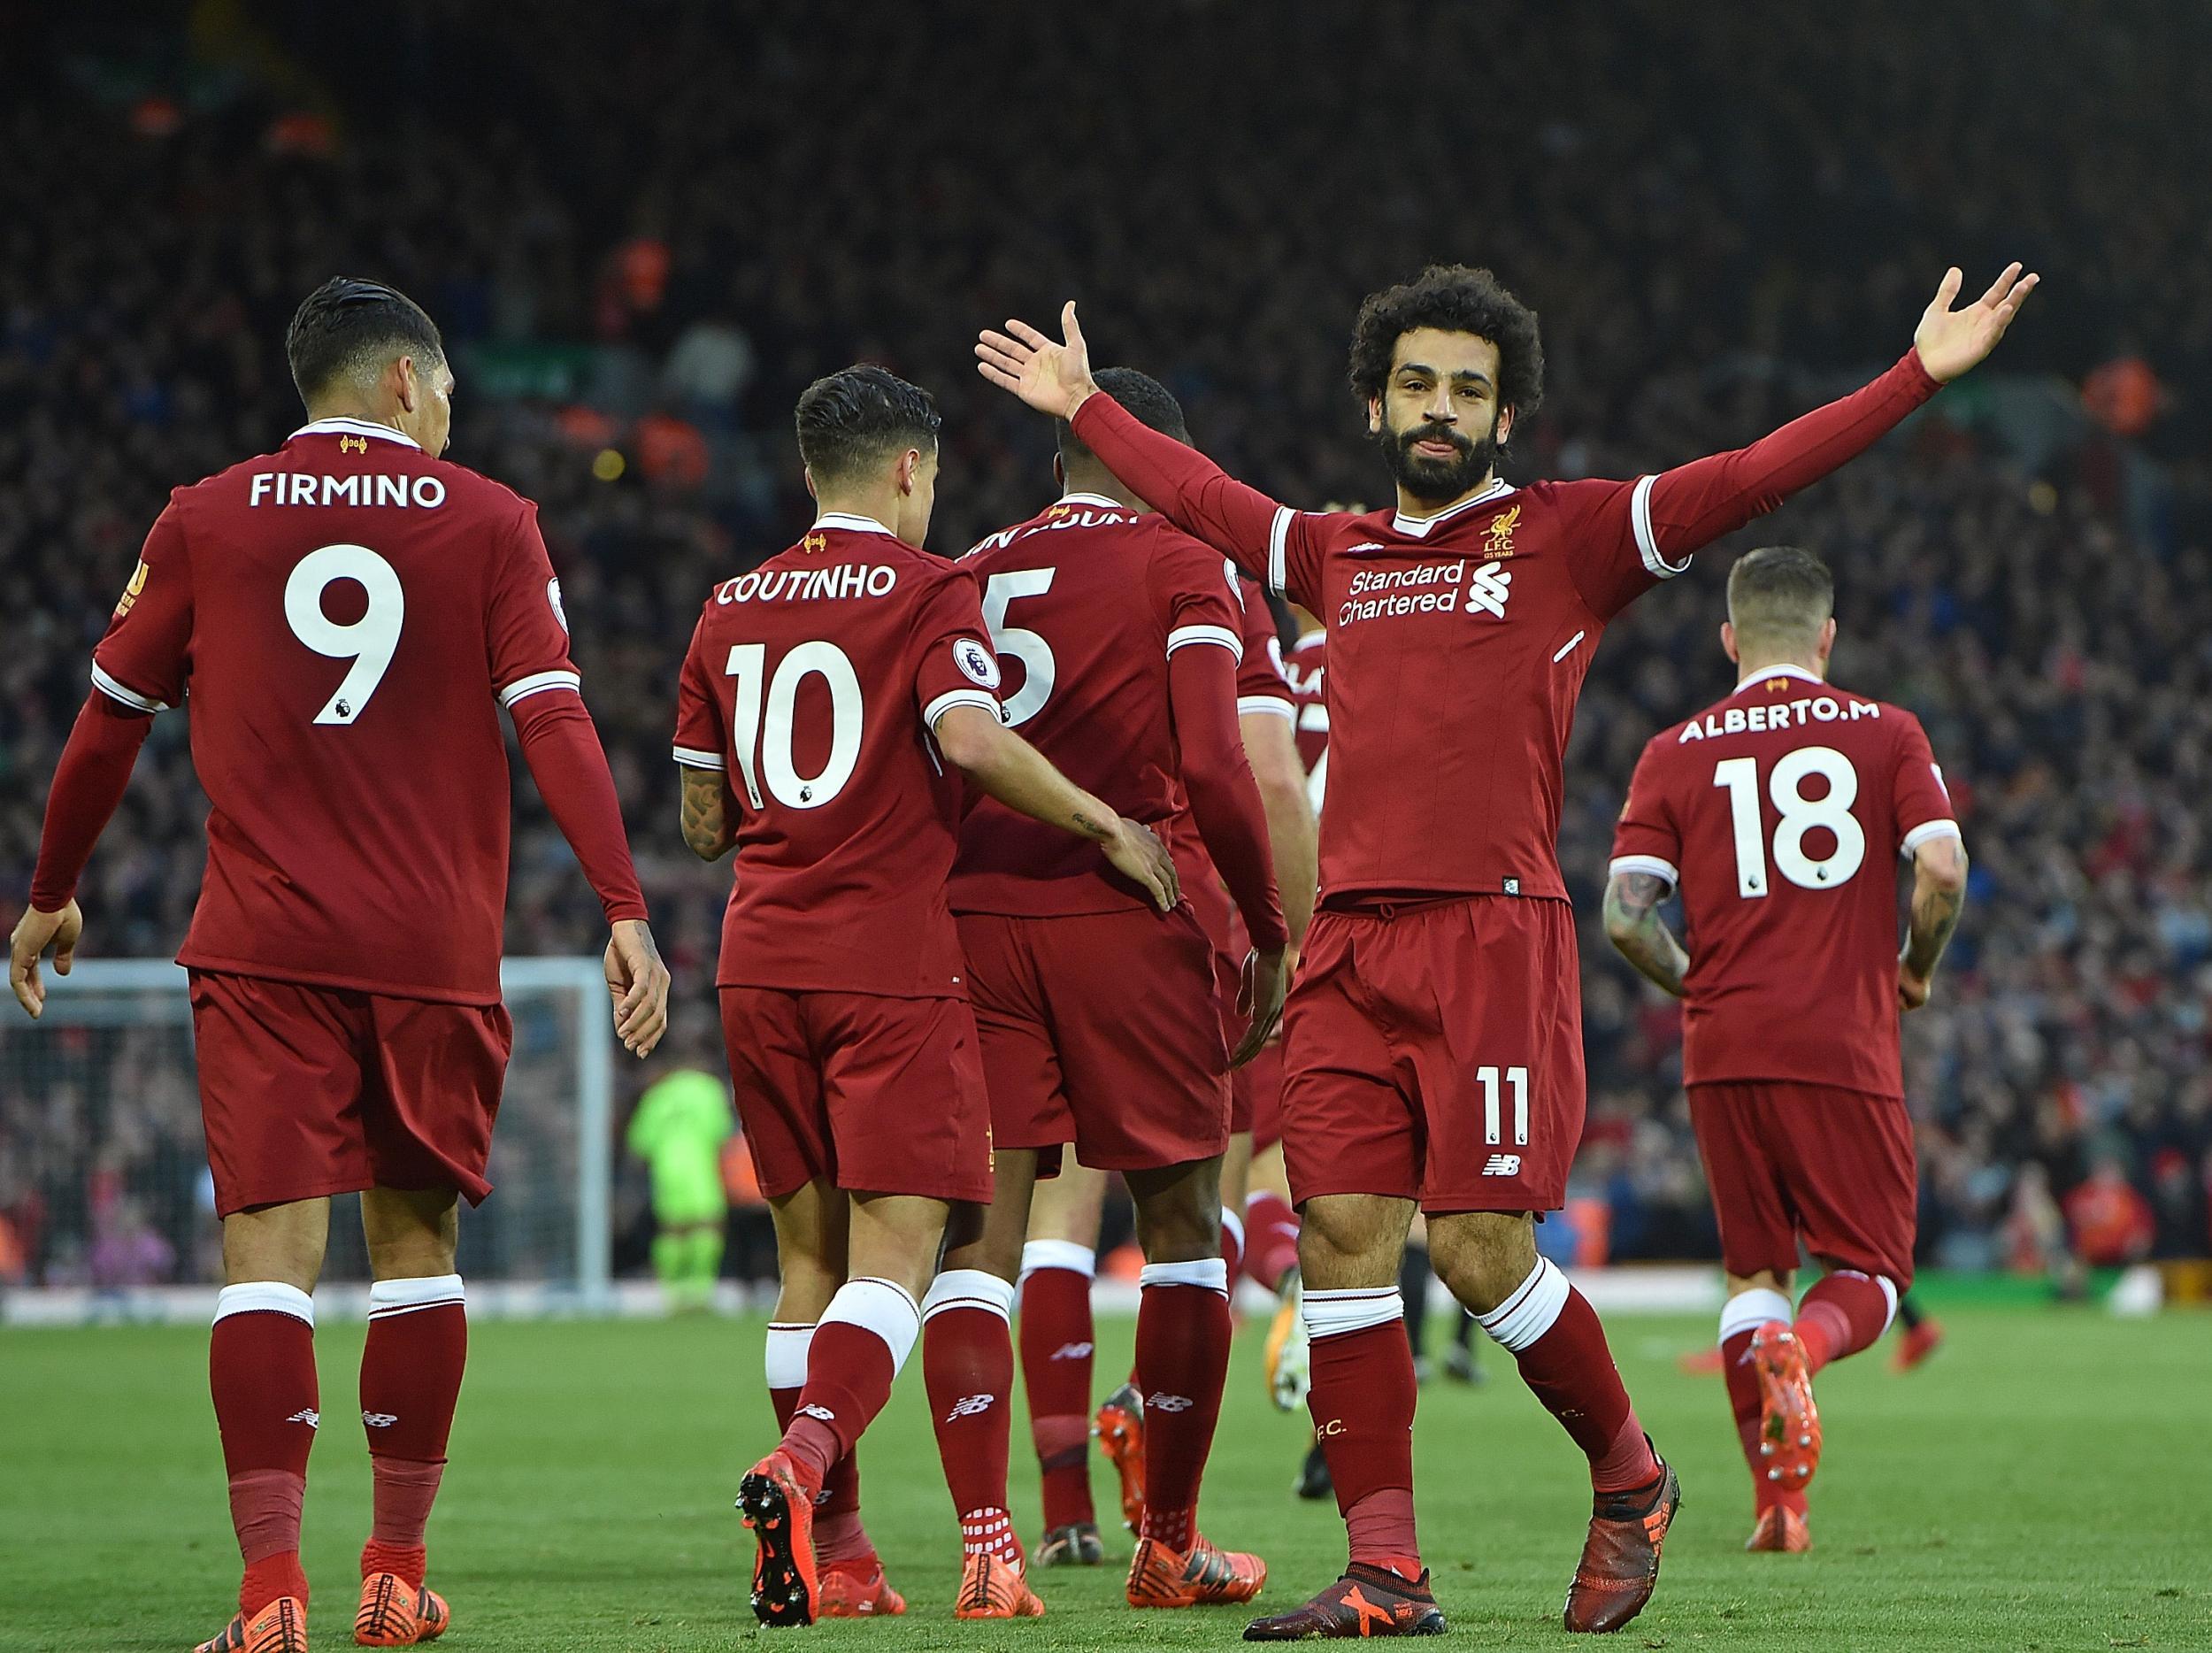 Mohamed Salah was the star of the show at Anfield